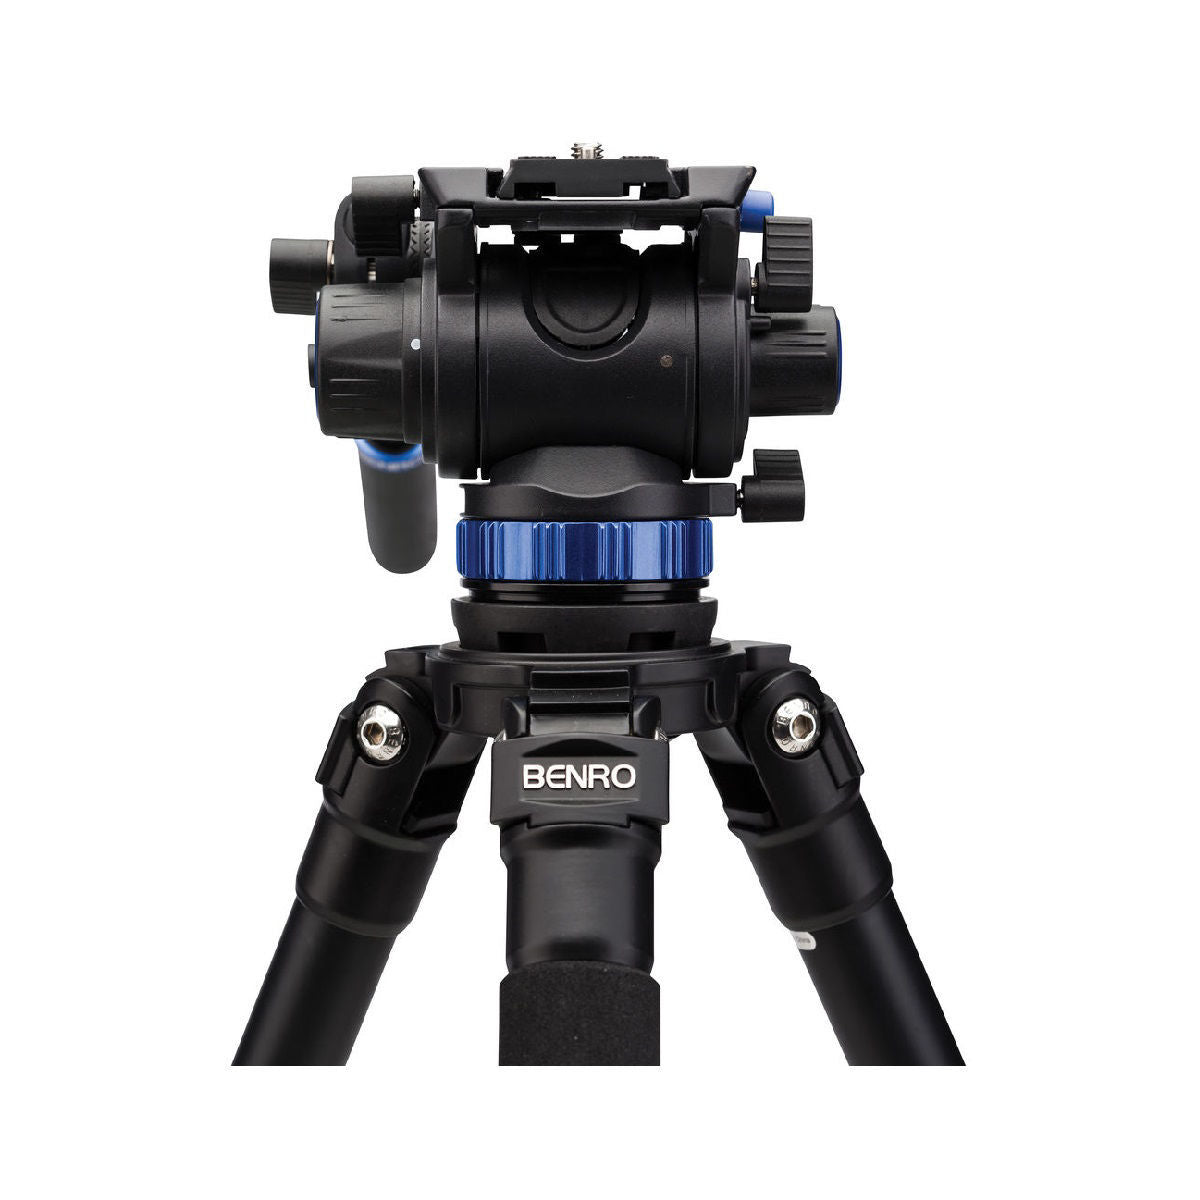 Benro S7 Video Tripod Kit With A373f Aluminum Legs